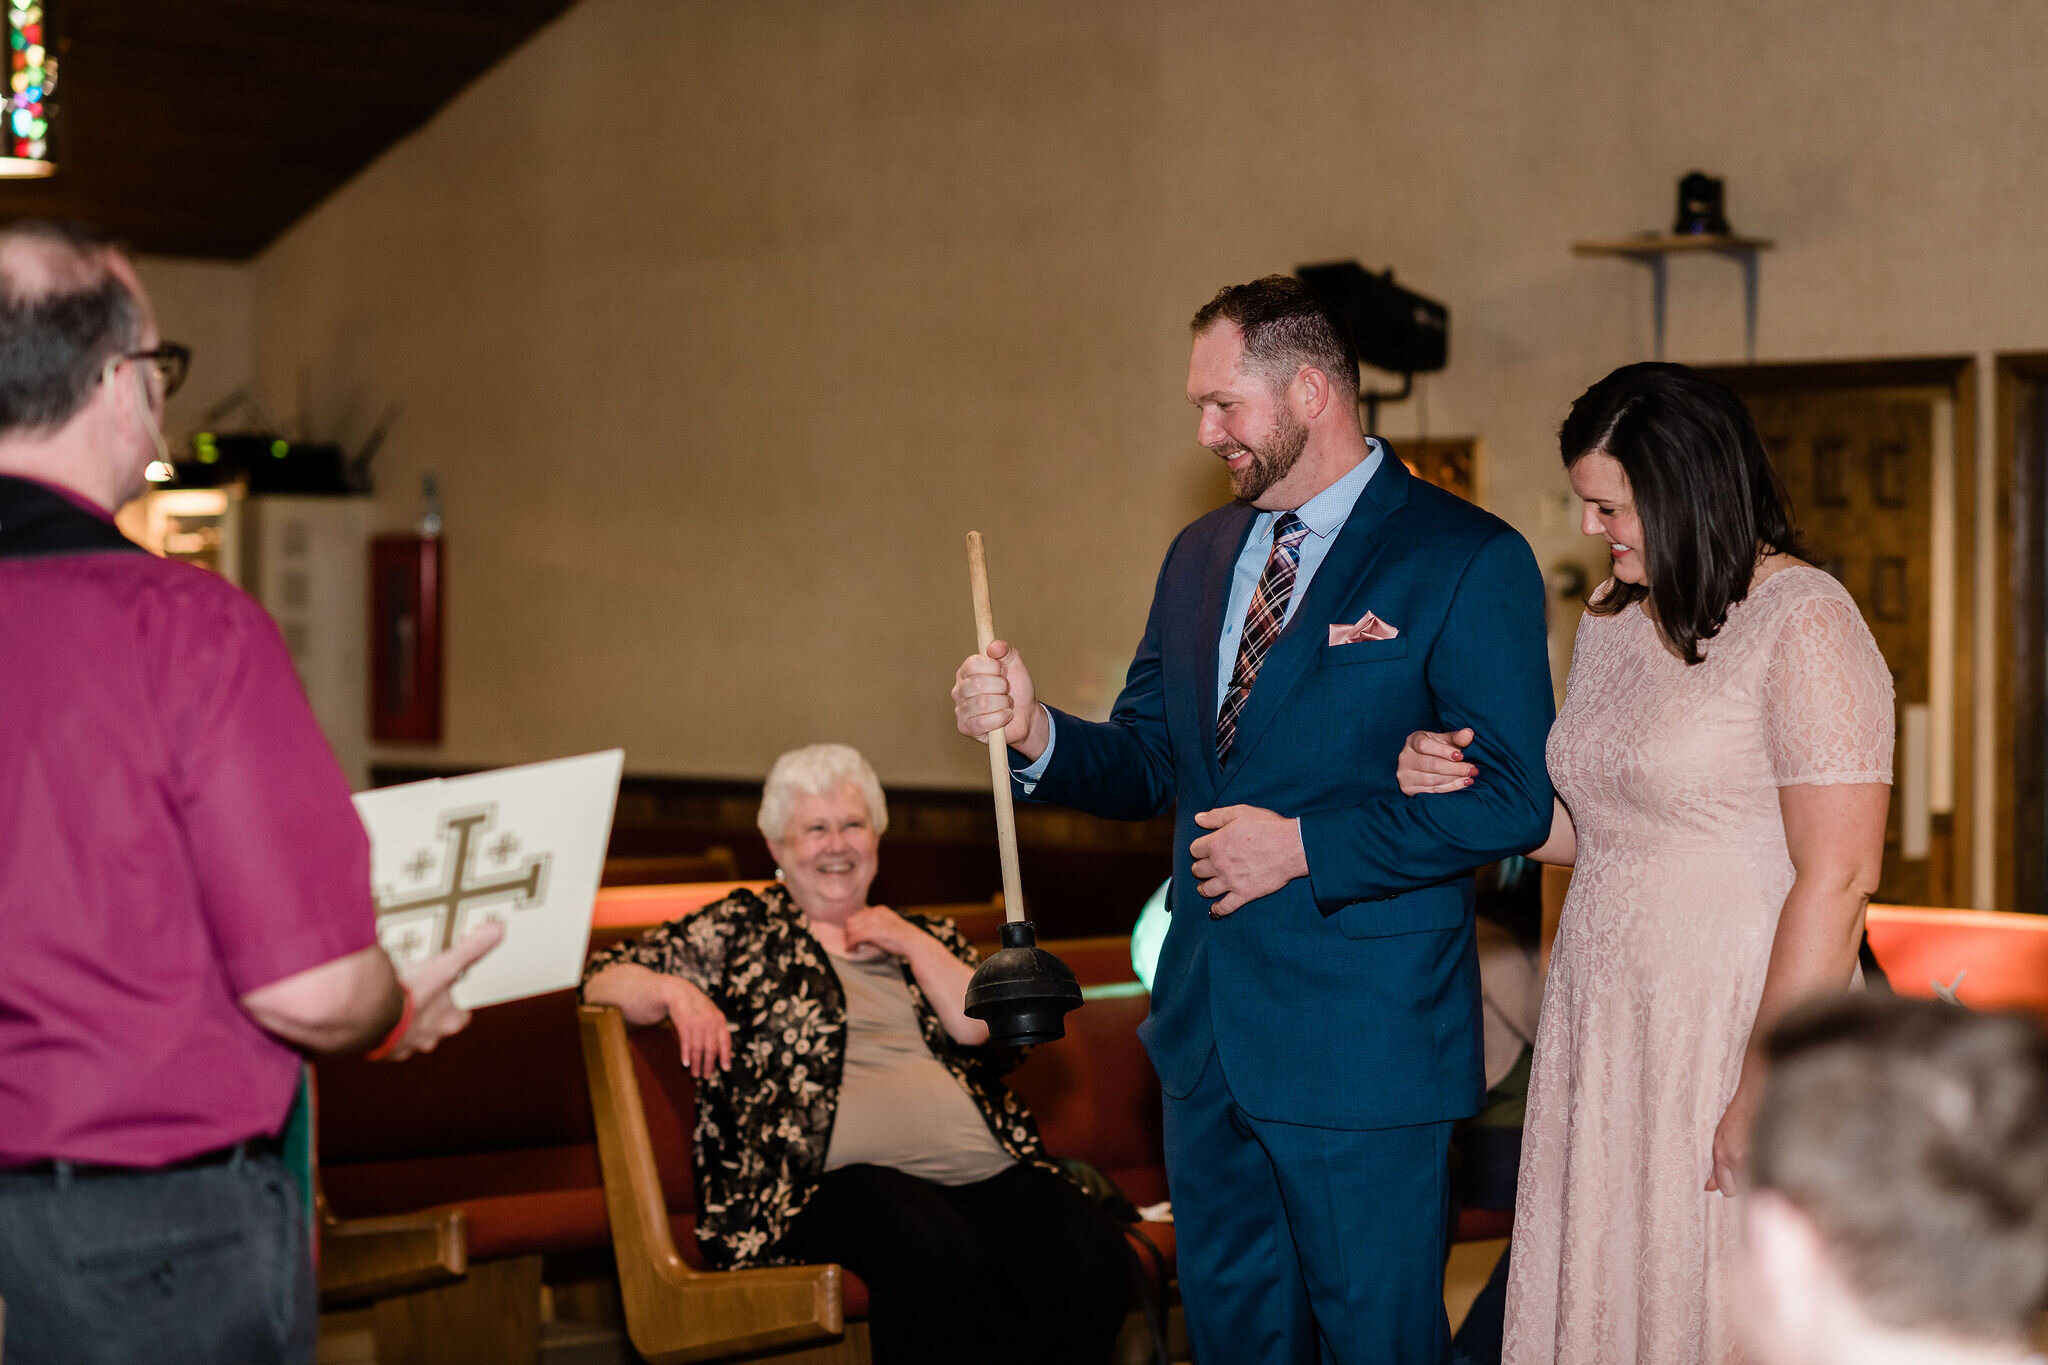 Groom holding a plunger in church